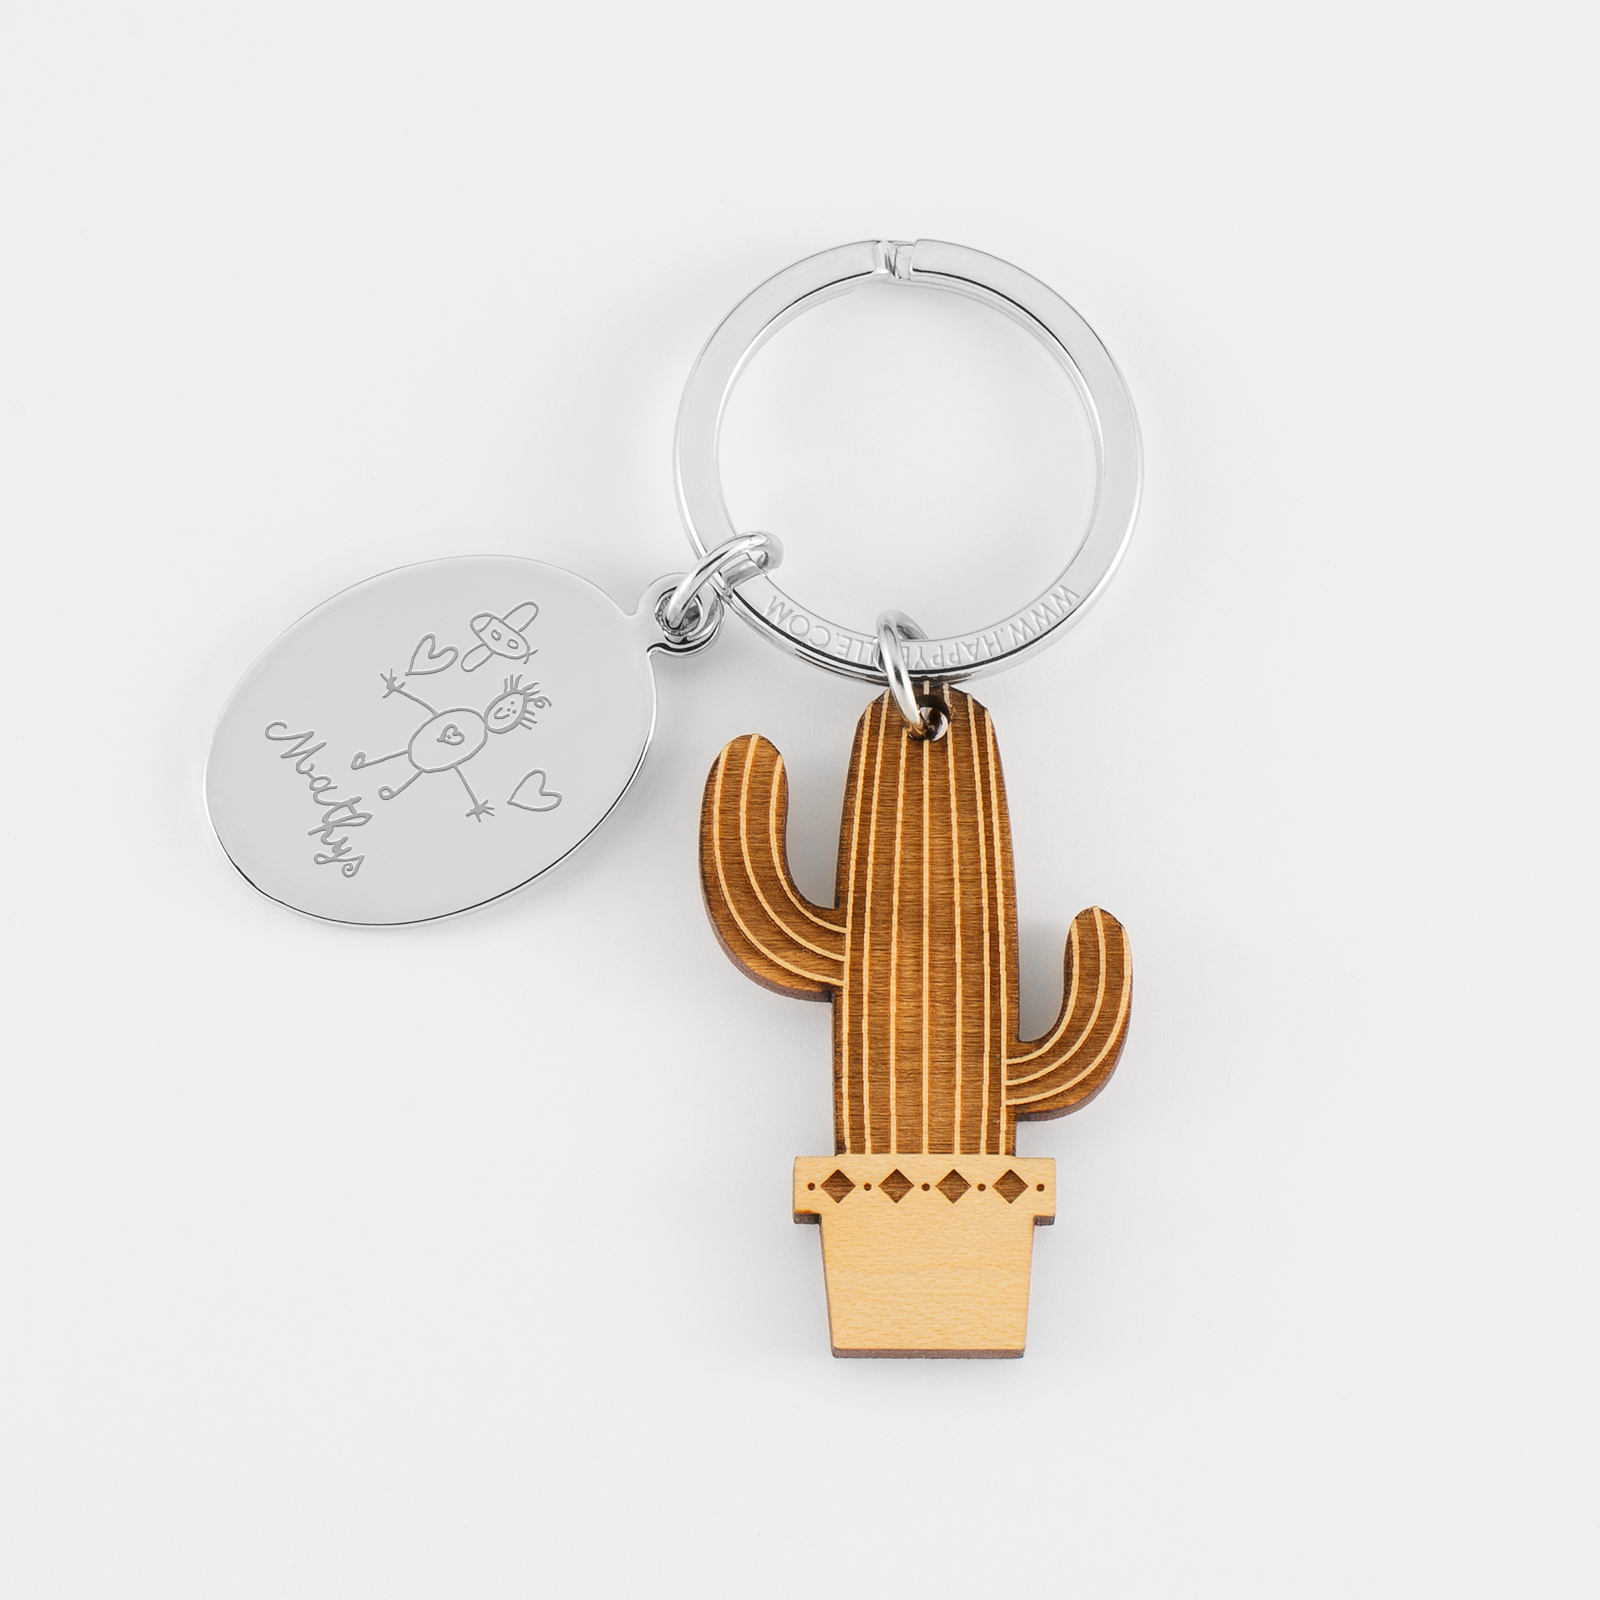 Personalised engraved oval steel medallion and wooden cactus charm keyring - sketch